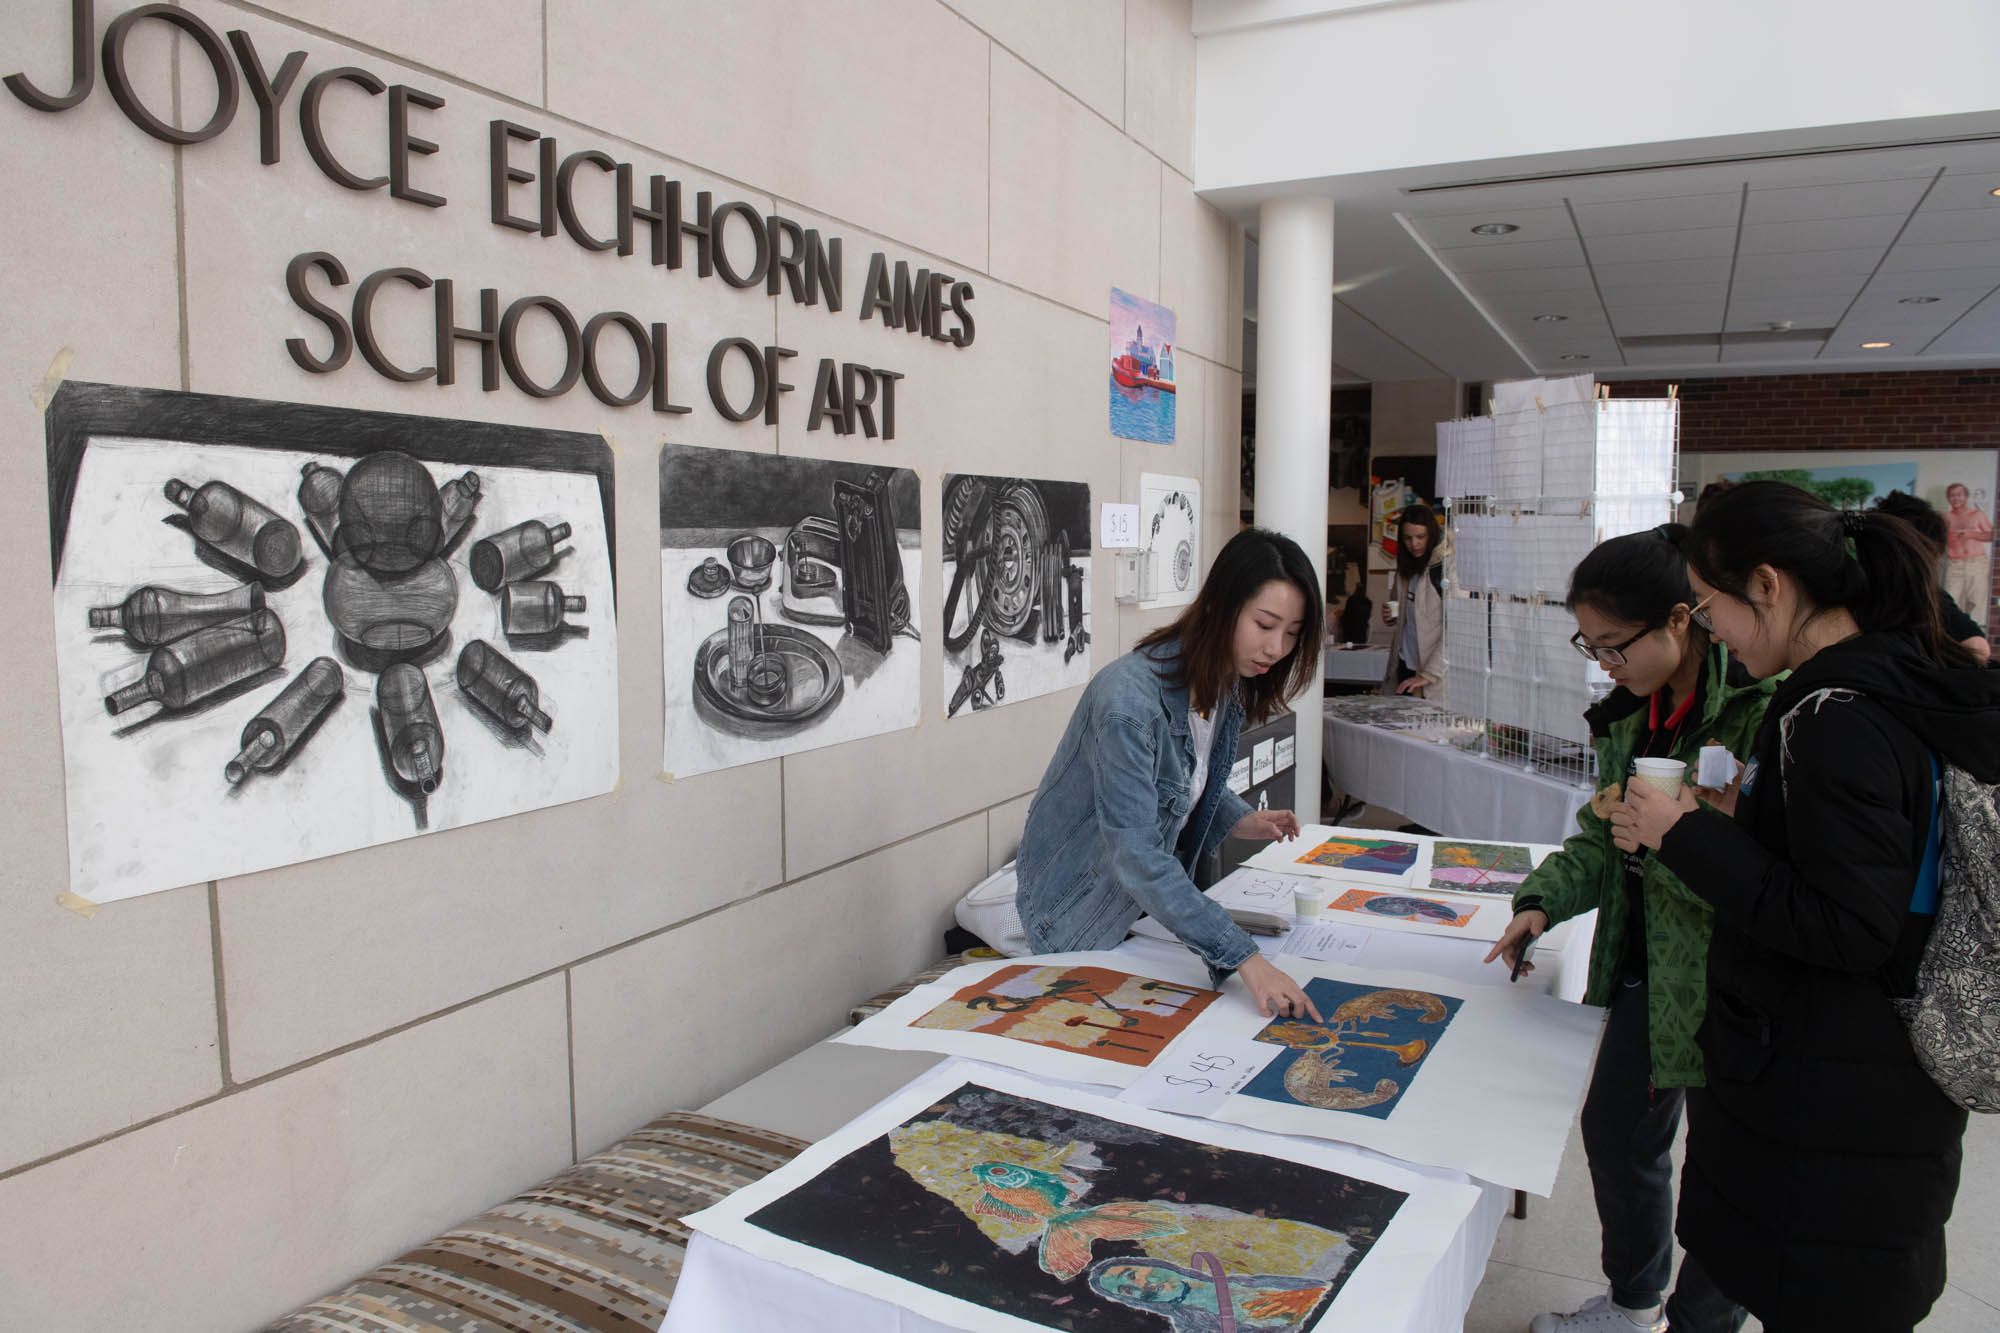 Student artist pointing at art print in front of Joyce Eichhorn Ames School of Art and Design sign